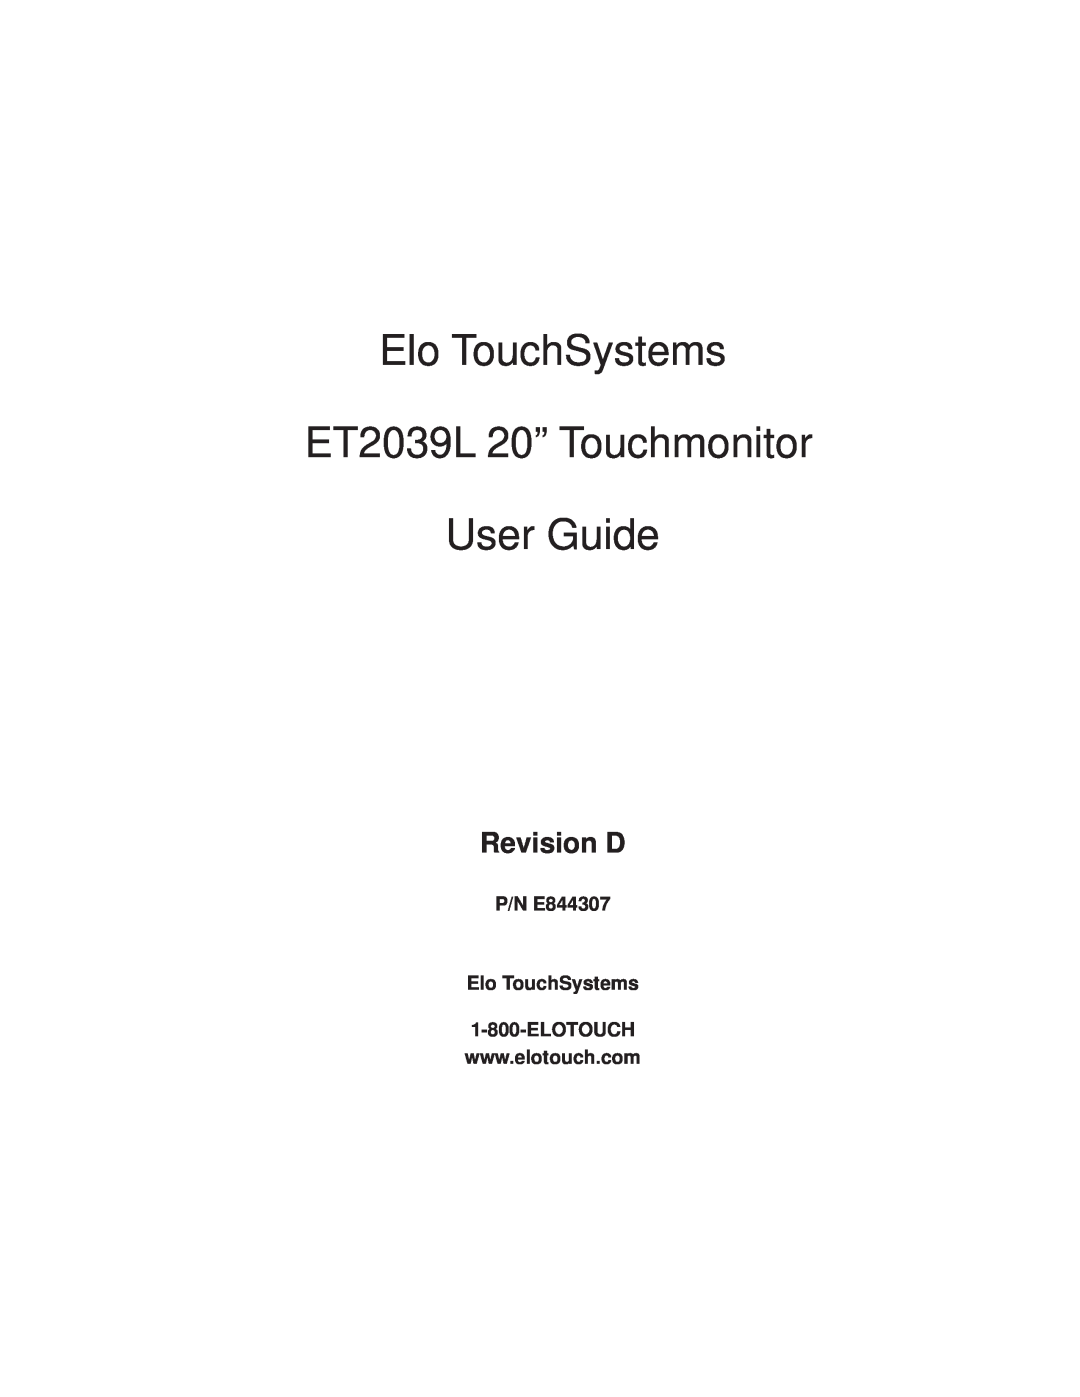 Elo TouchSystems manual Revision D, Elo TouchSystems ET2039L 20” Touchmonitor User Guide 